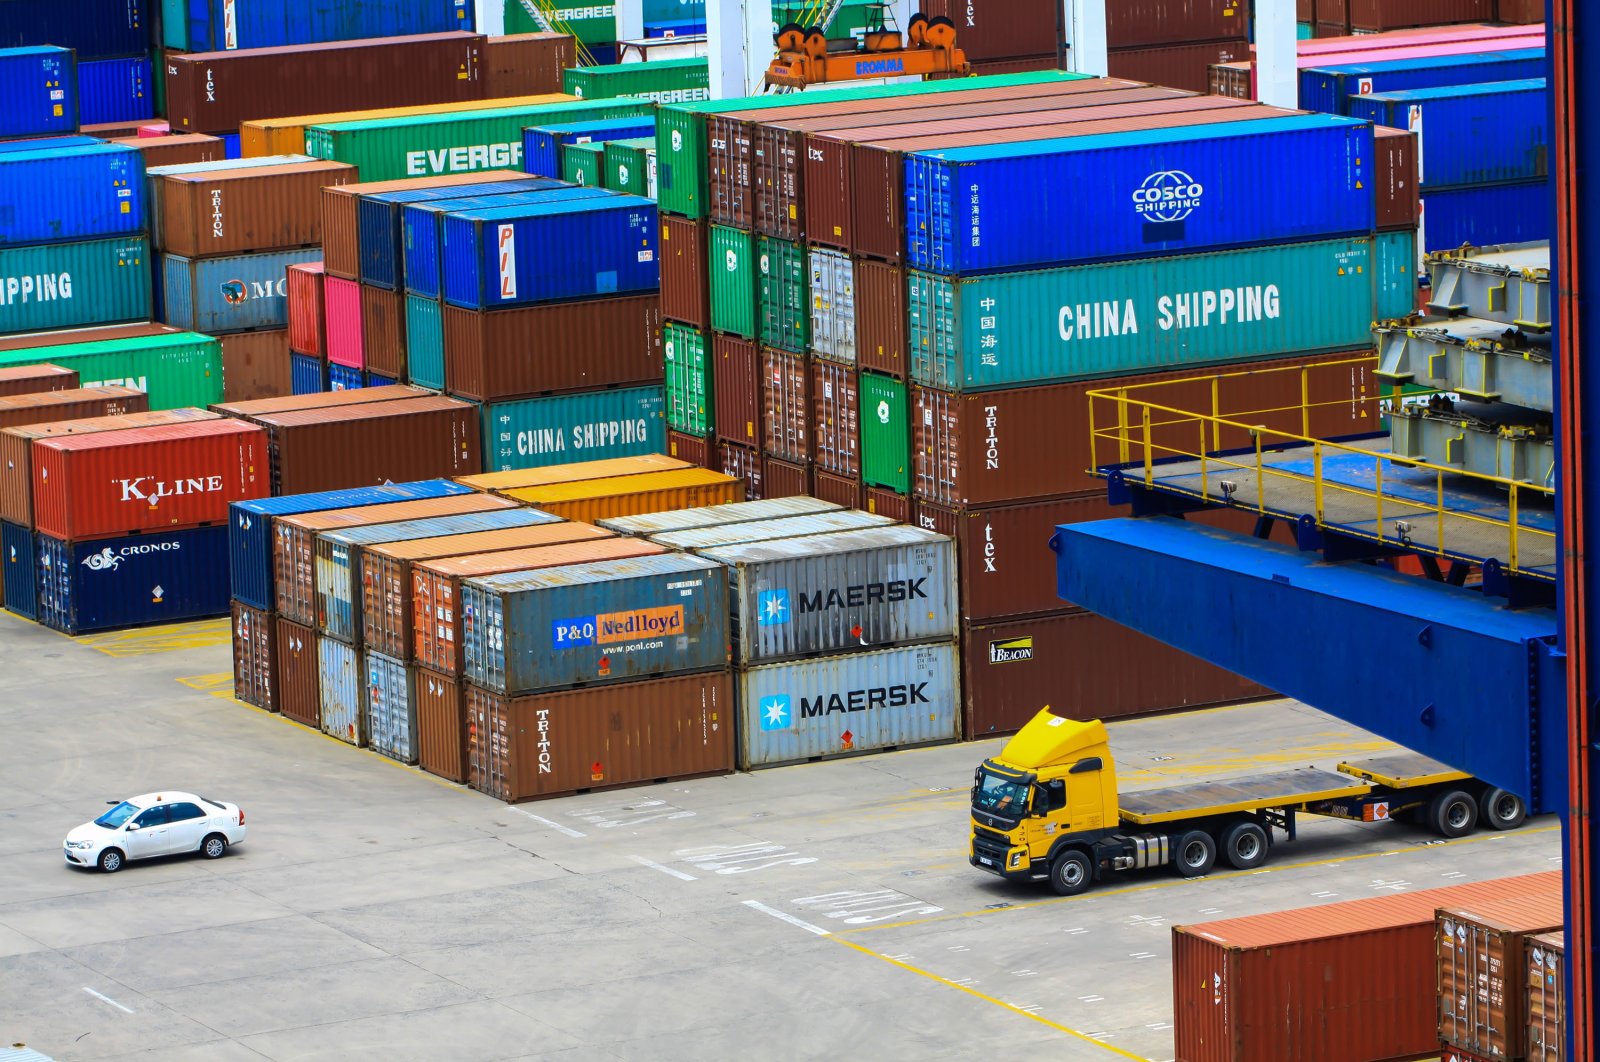 A container ship terminal at the Port of Durban, South Africa, Jan. 28, 2019. (Shutterstock Photo)